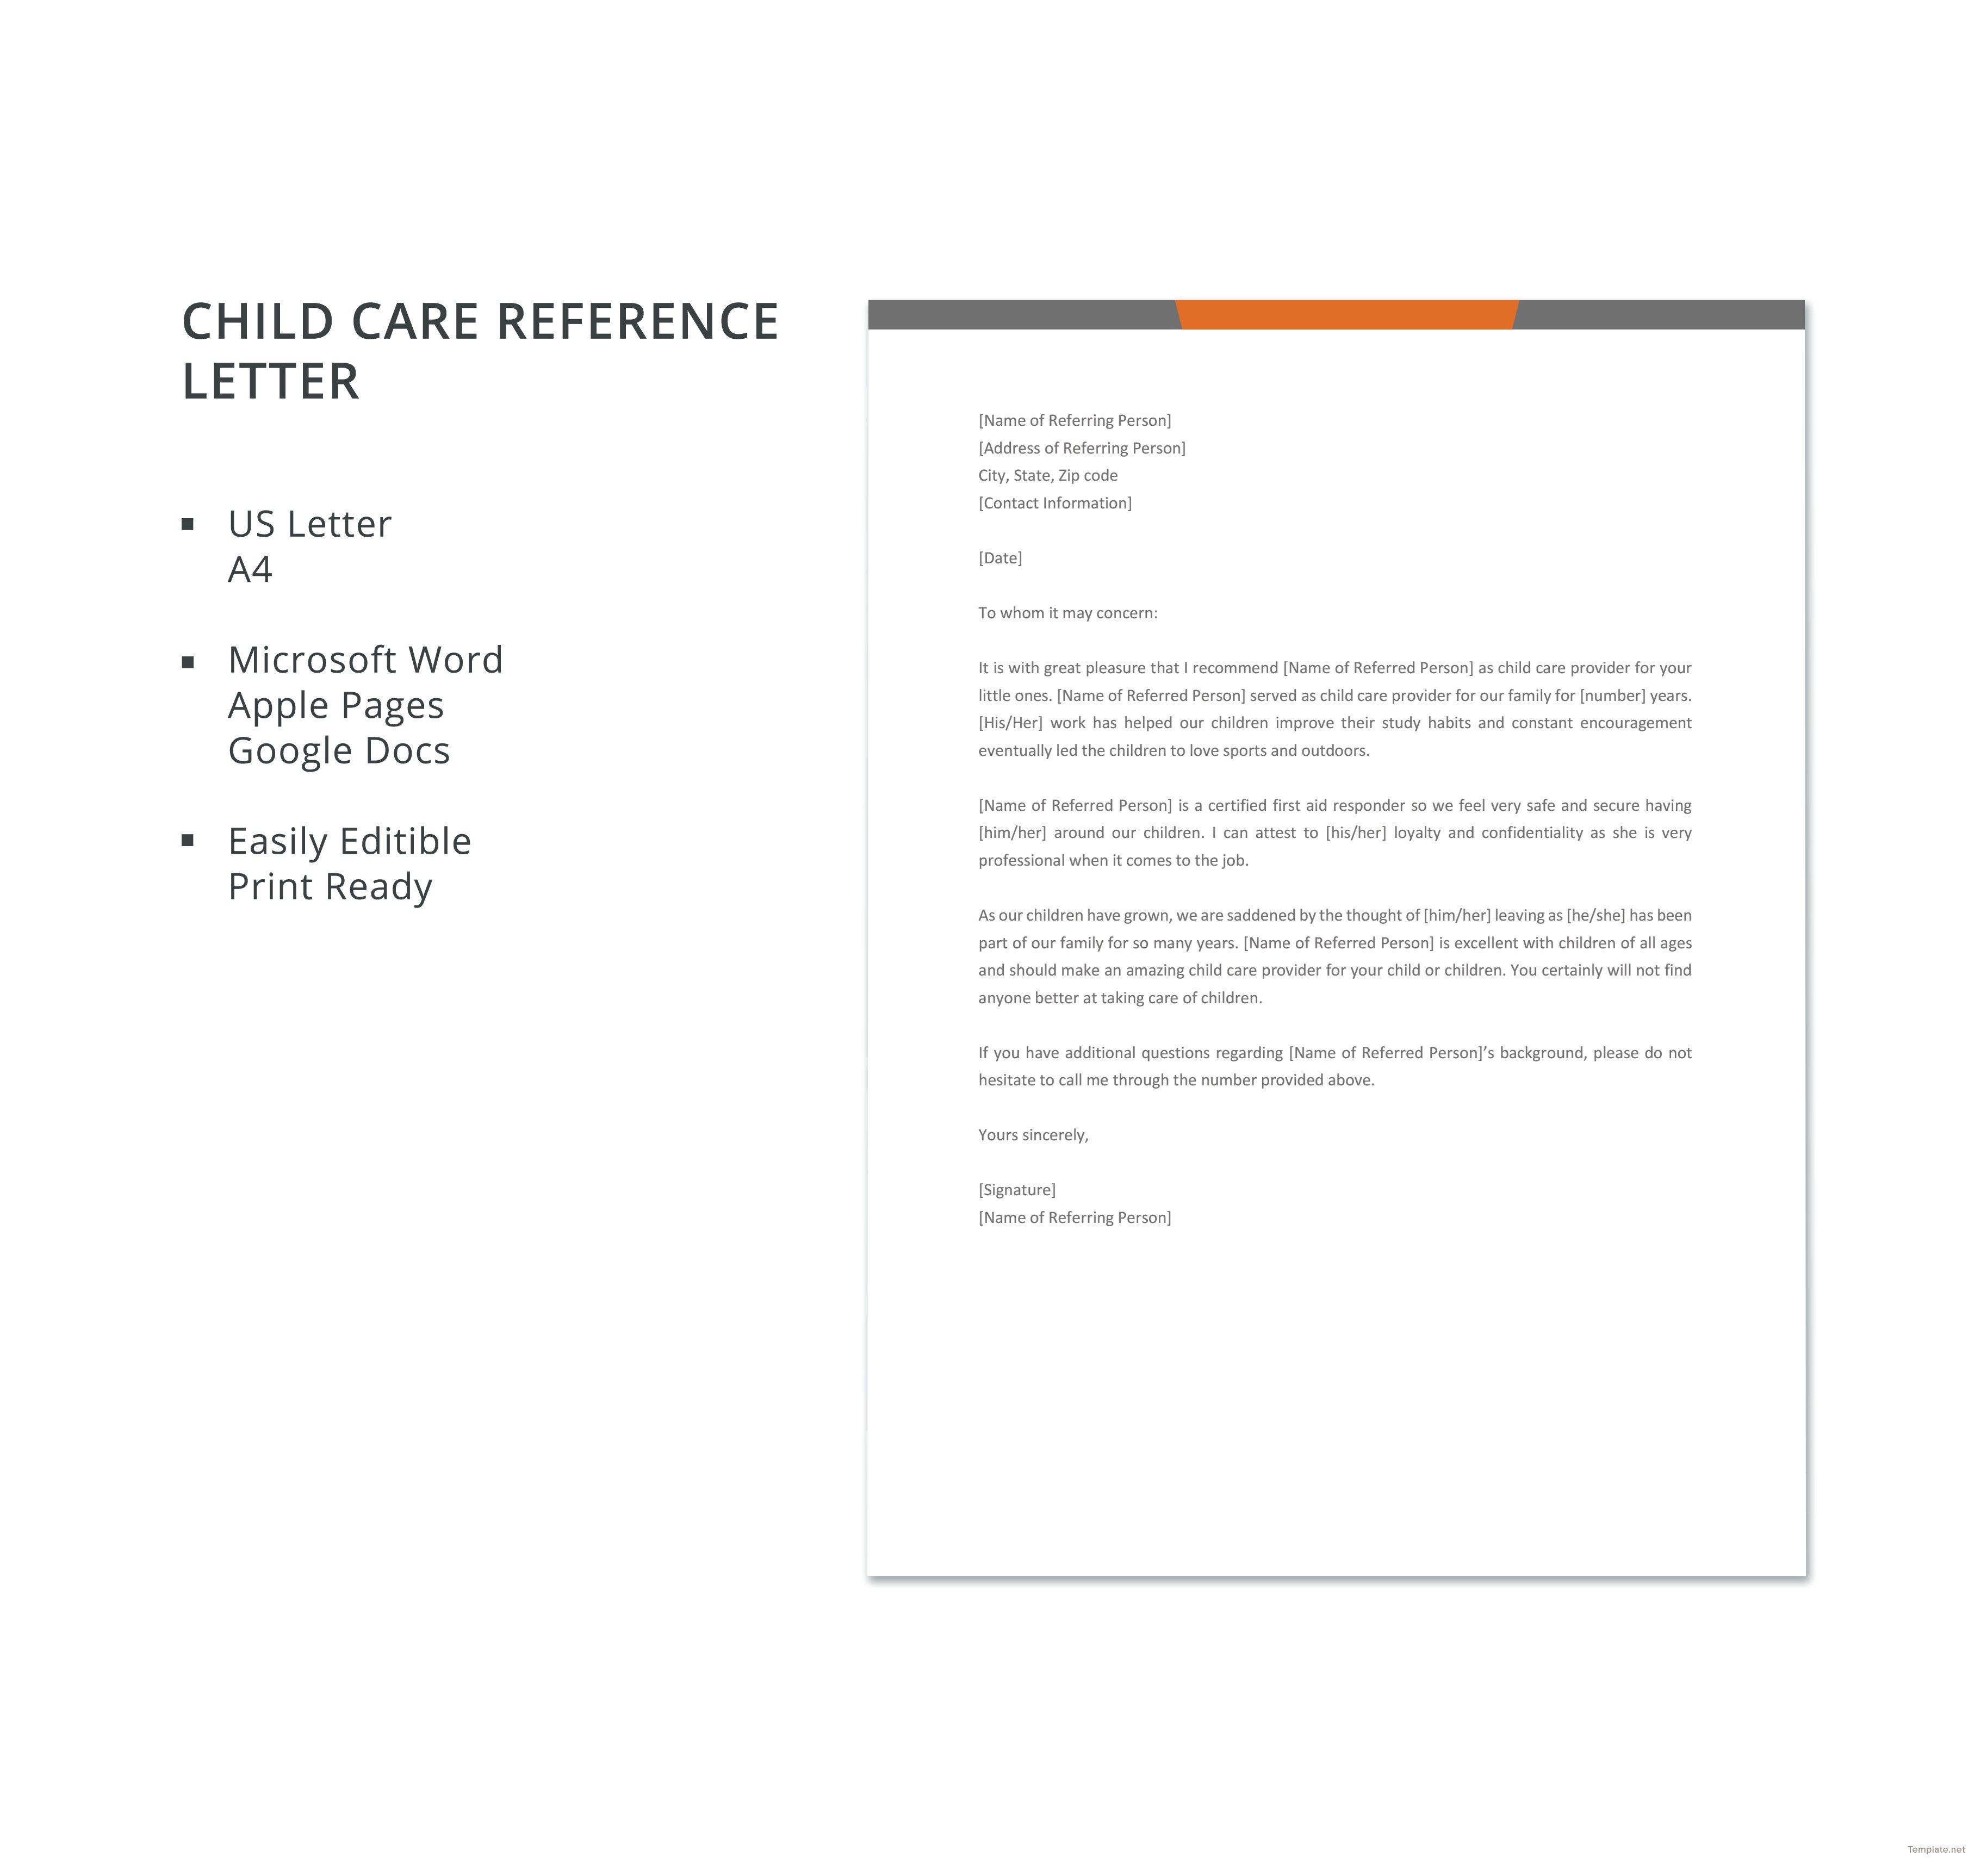 Free Child Care Reference Letter Template in Microsoft Word, Apple